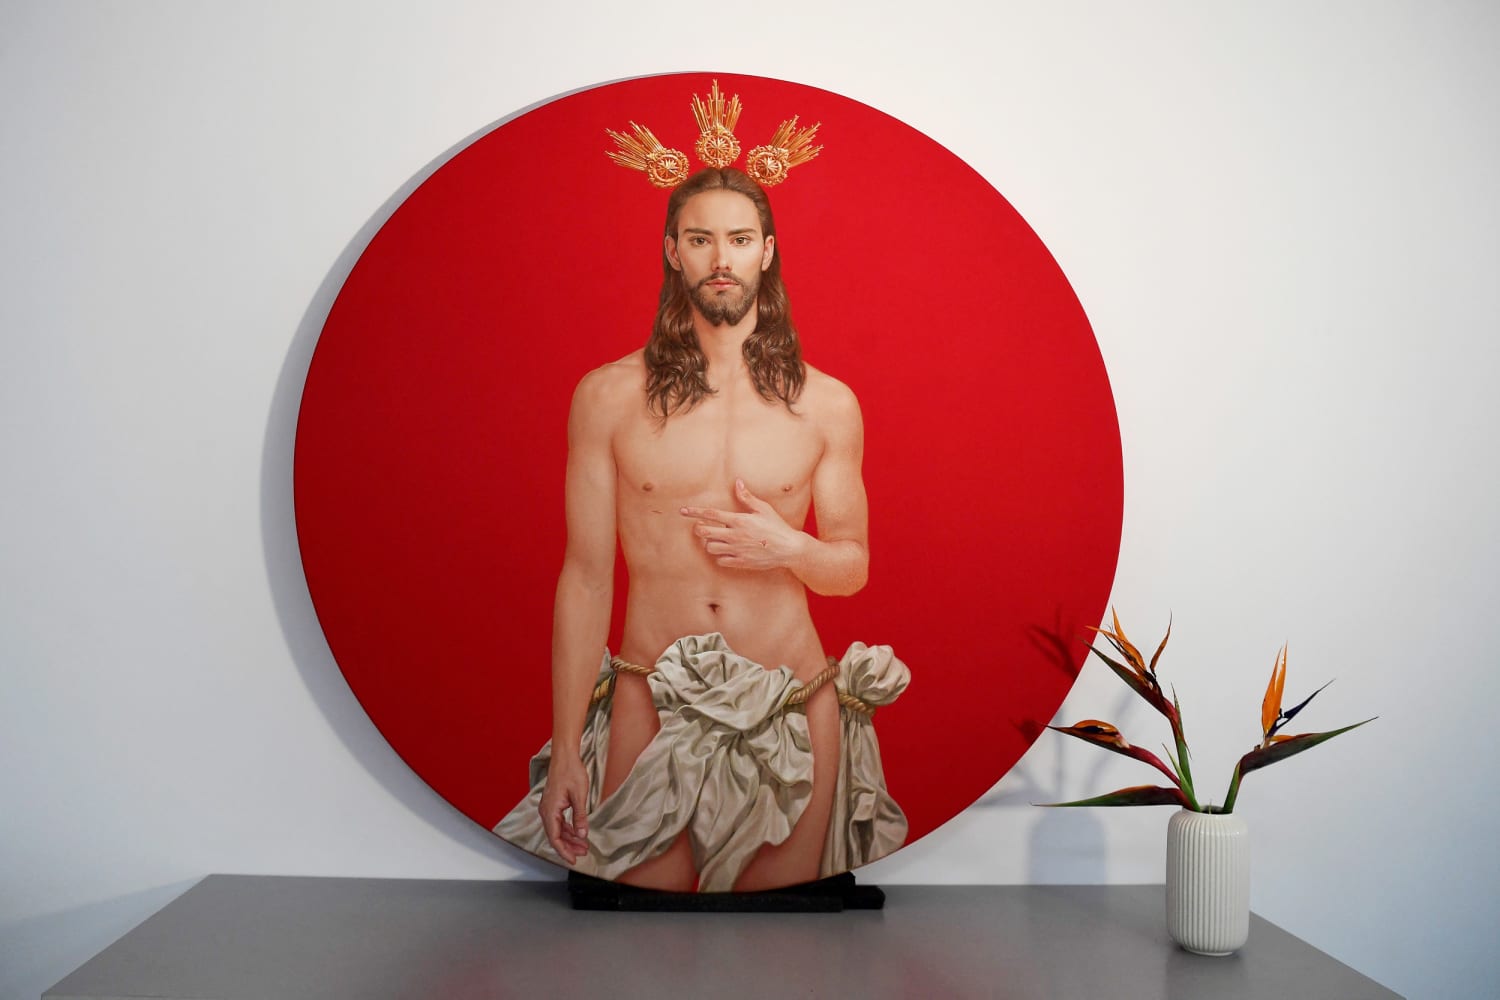 Jesus Christ sexy?  This artist's painting sparks controversy on social media